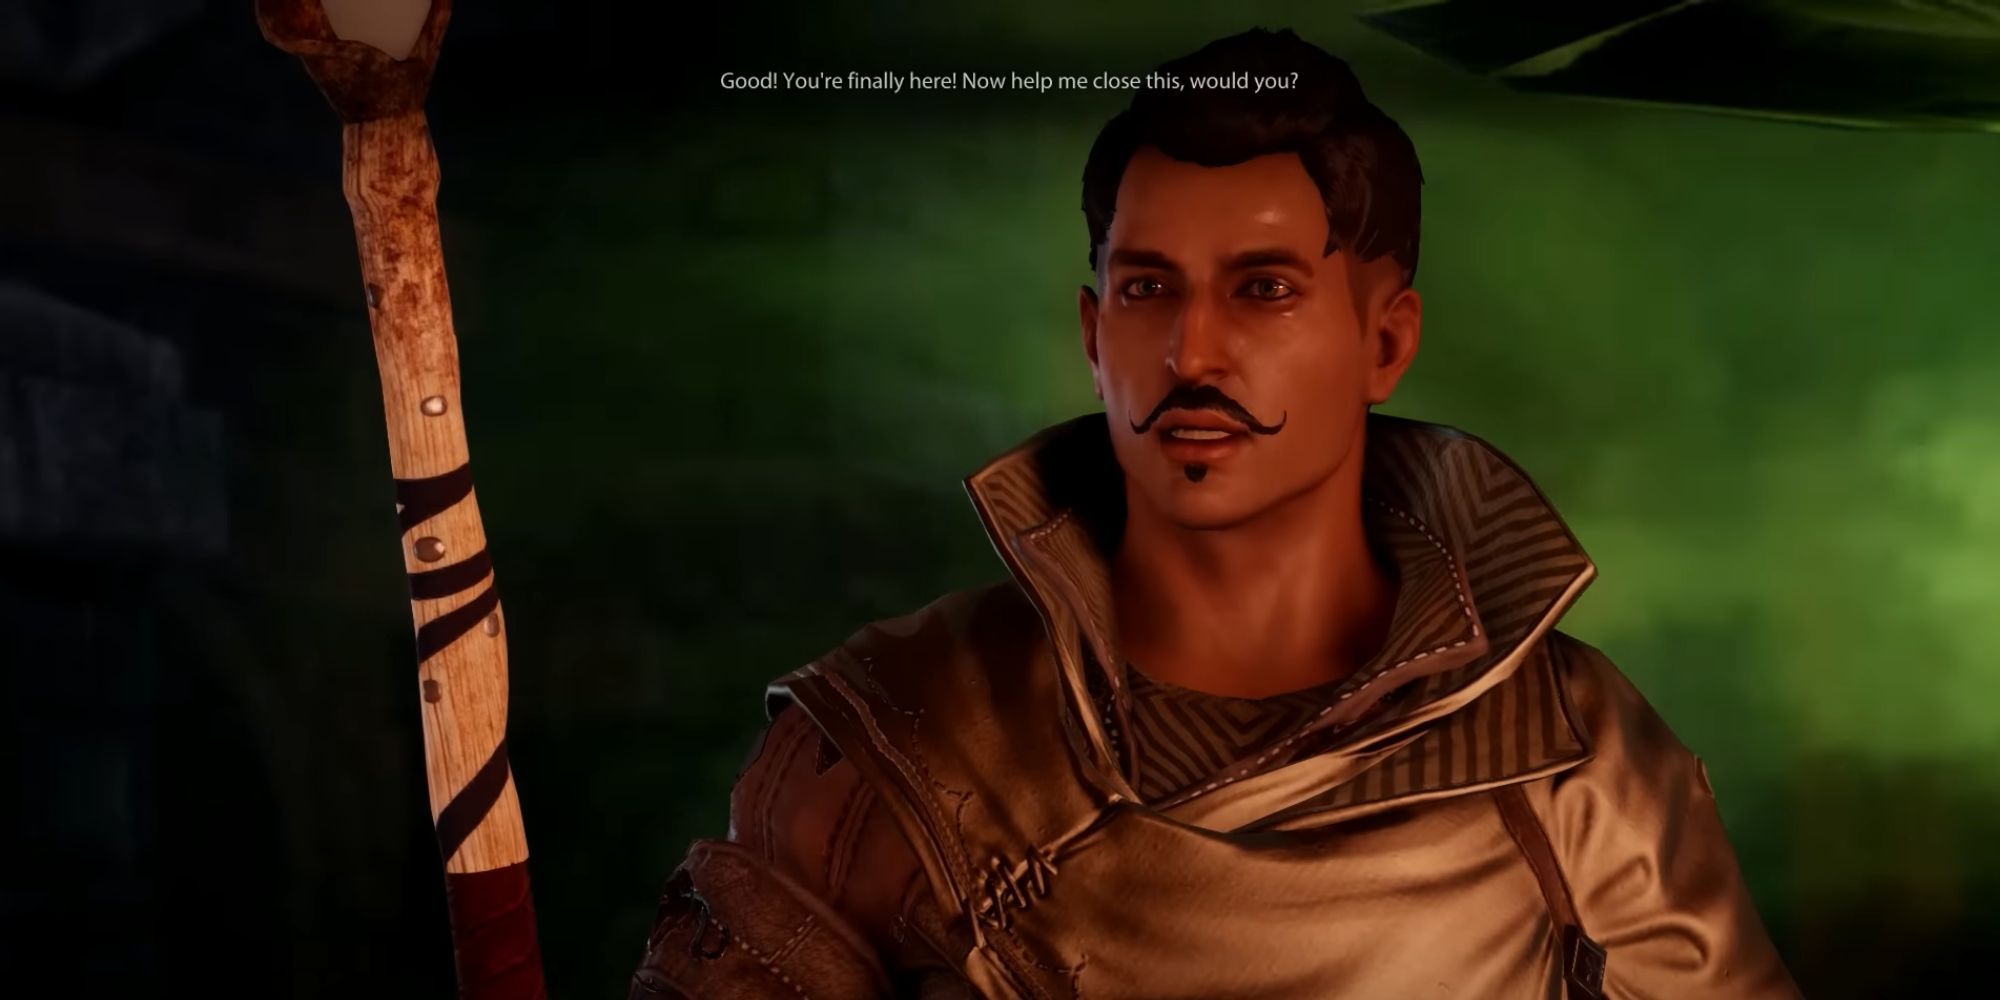 Dorian stands in front of a rift and asks the party to help him close it